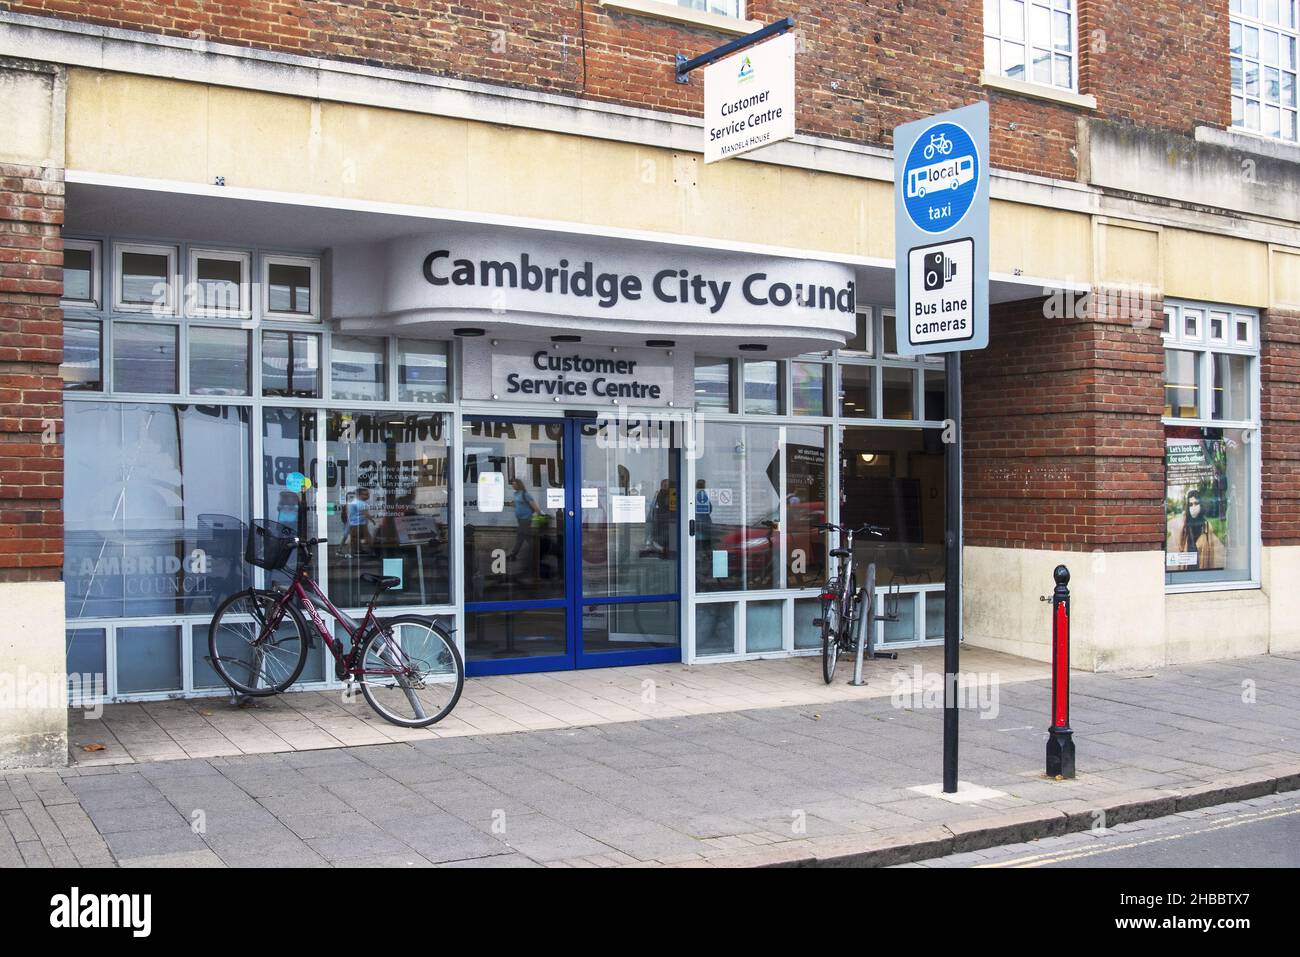 CAMBRIDGE, UNITED KINGDOM - Sep 18, 2021: The front entrance to Cambridge City Council offices on Regent Street Stock Photo